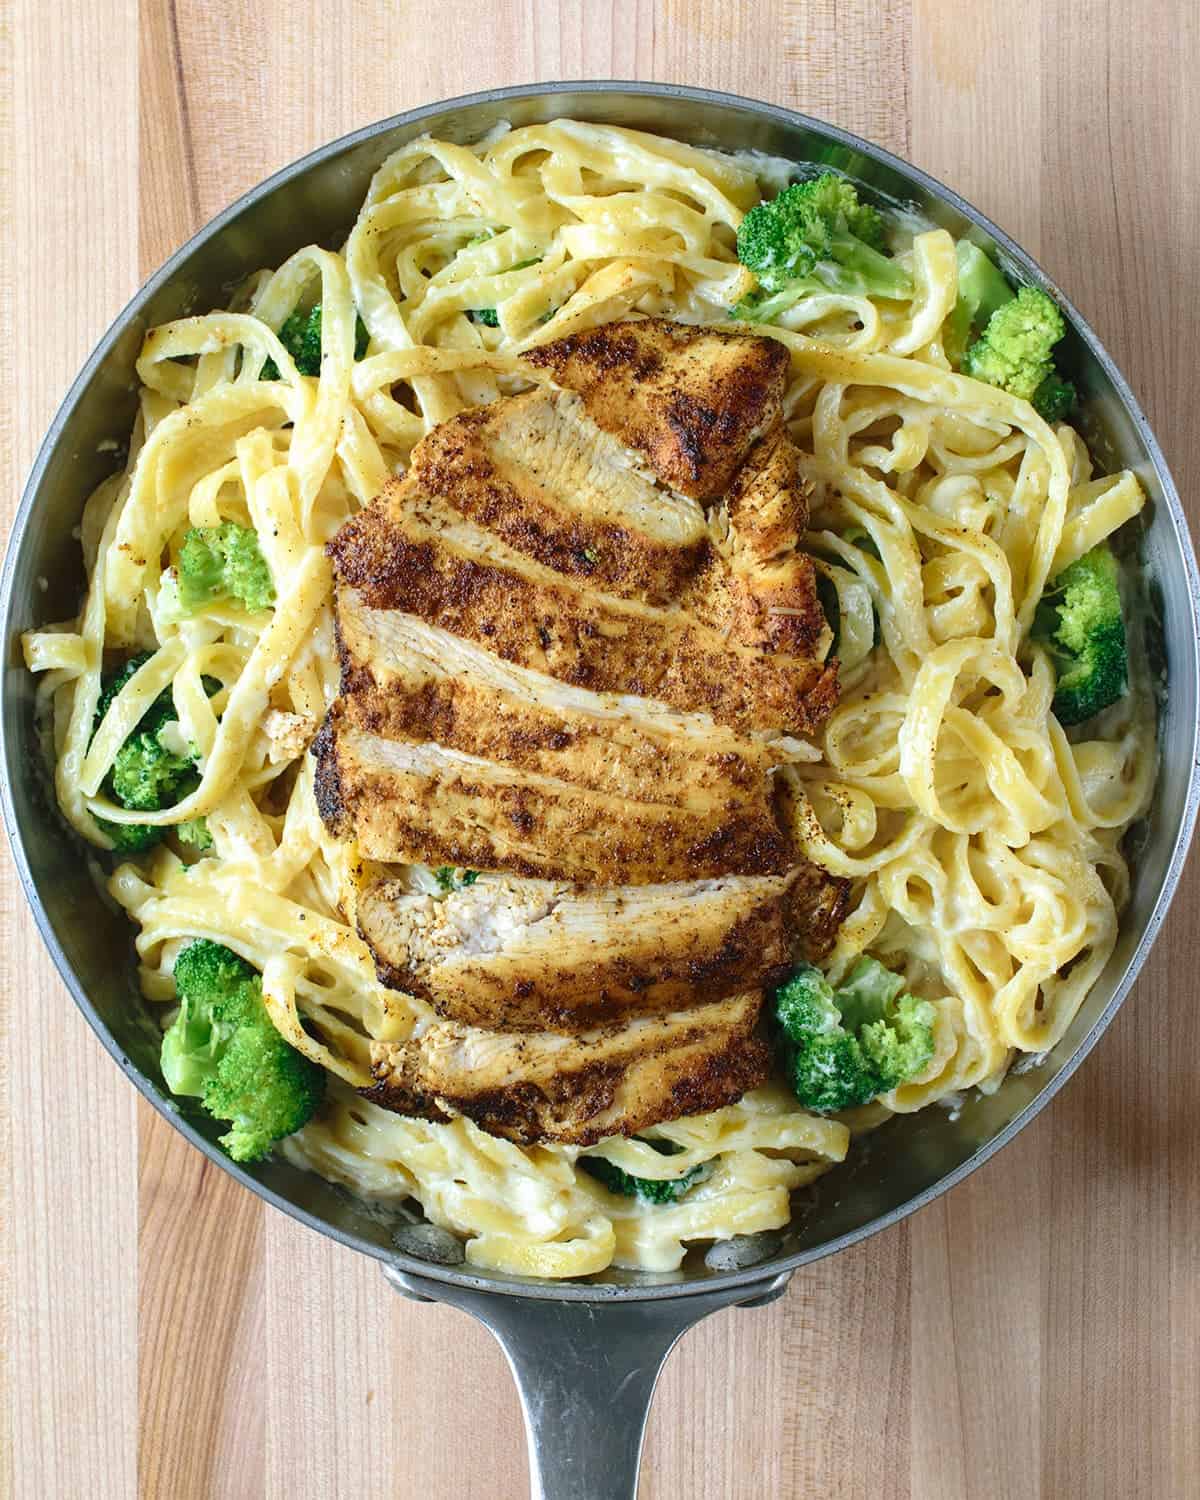 Cajun Chicken Alfredo Pasta - this creamy homemade afredo sauce comes together easy and tastes delicious! Kick it up a notch with spicy cajun chicken or leave plain for a milder taste.